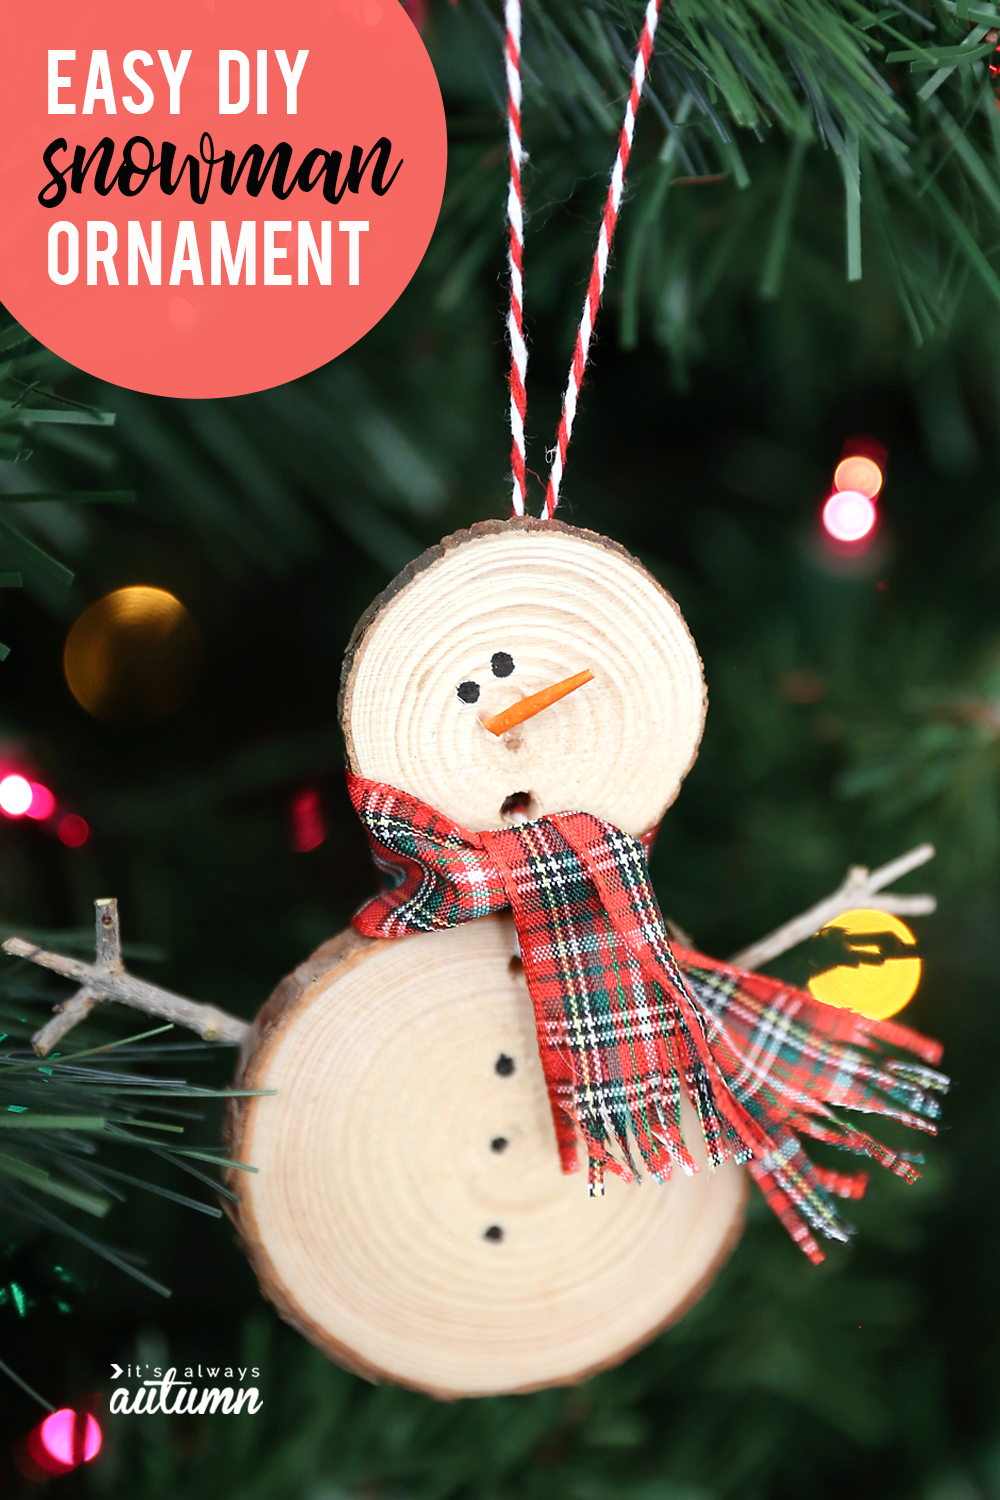 Snowman Christmas ornament made from small wood slices